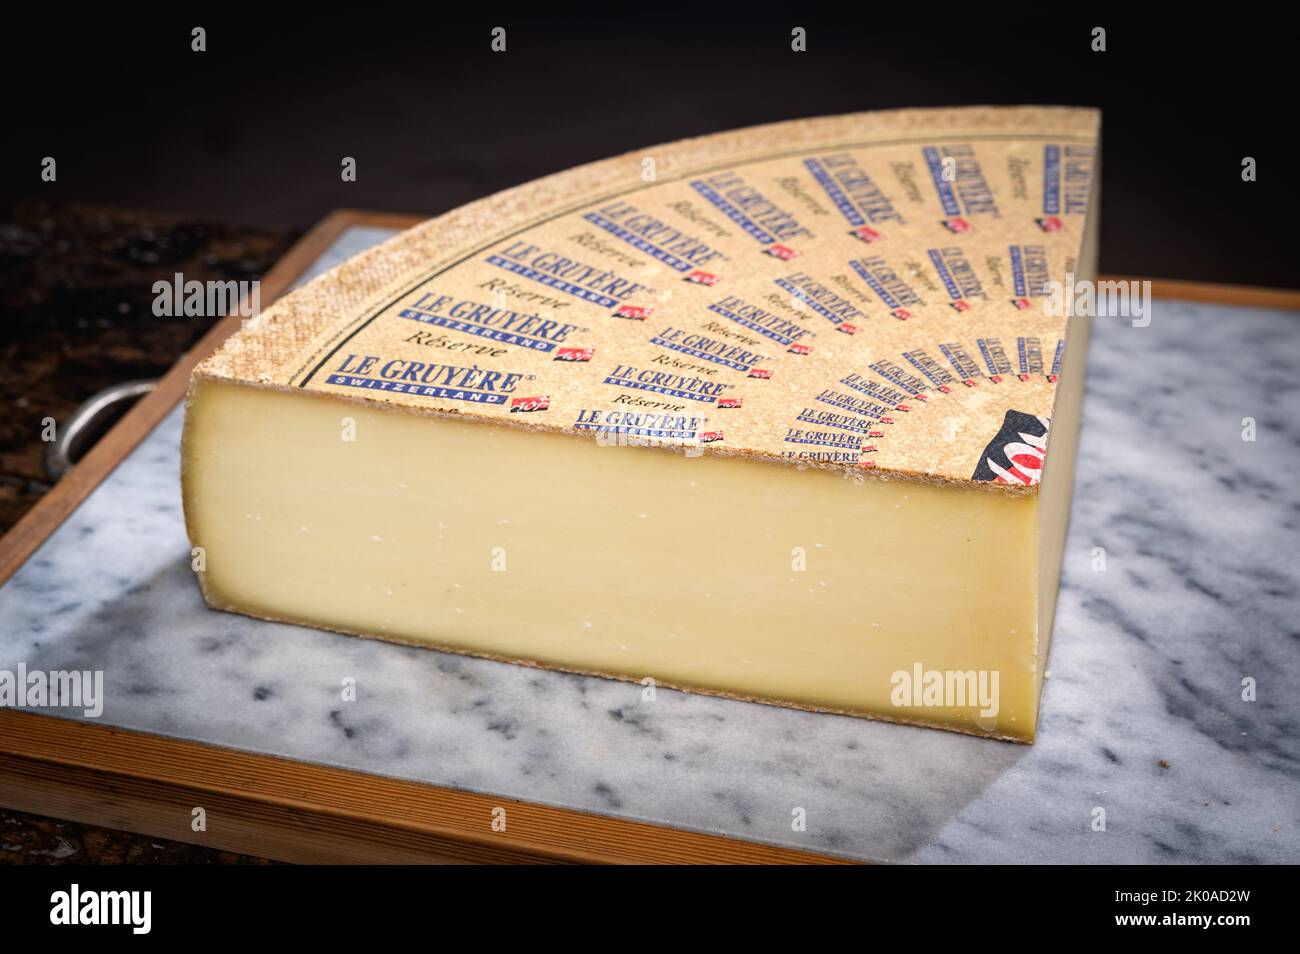 July 11 2022, Lyon, France : Switzerland cheese : Le Gruyère Réserve, famous swiss cheese in a cellar on a marbble background Stock Photo